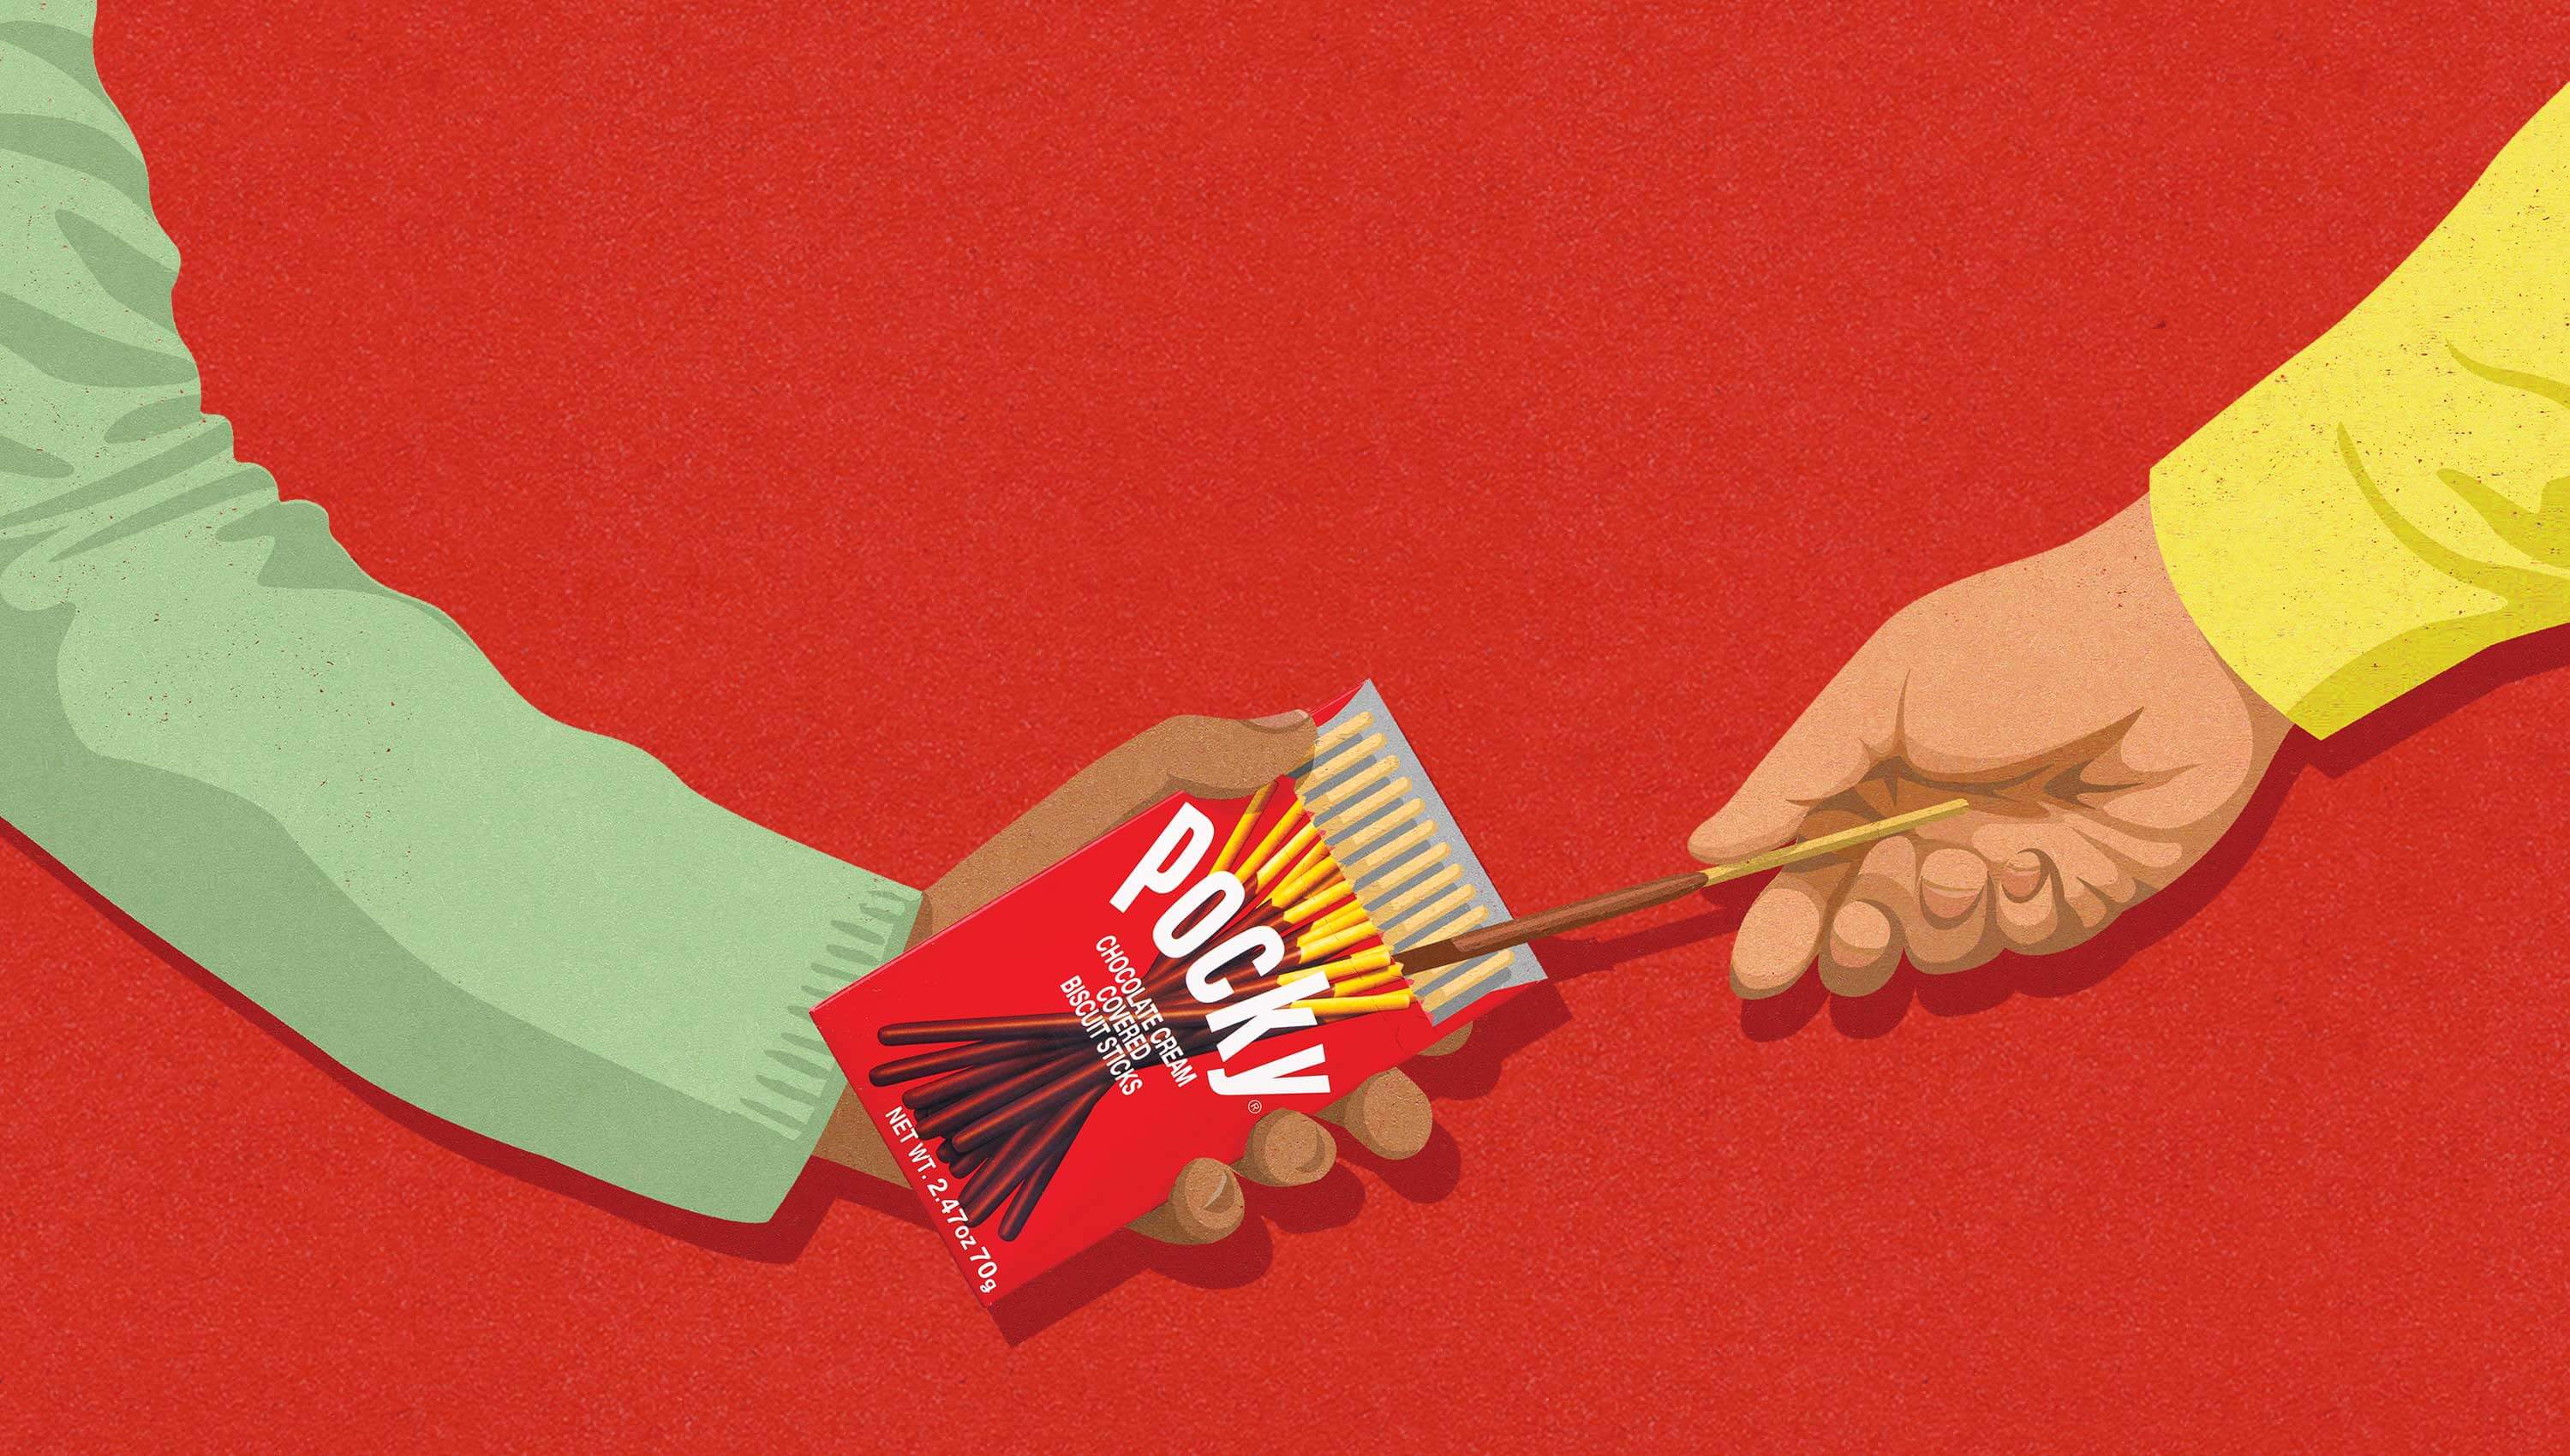 Sharing illustration for Pocky Day by John Holcroft